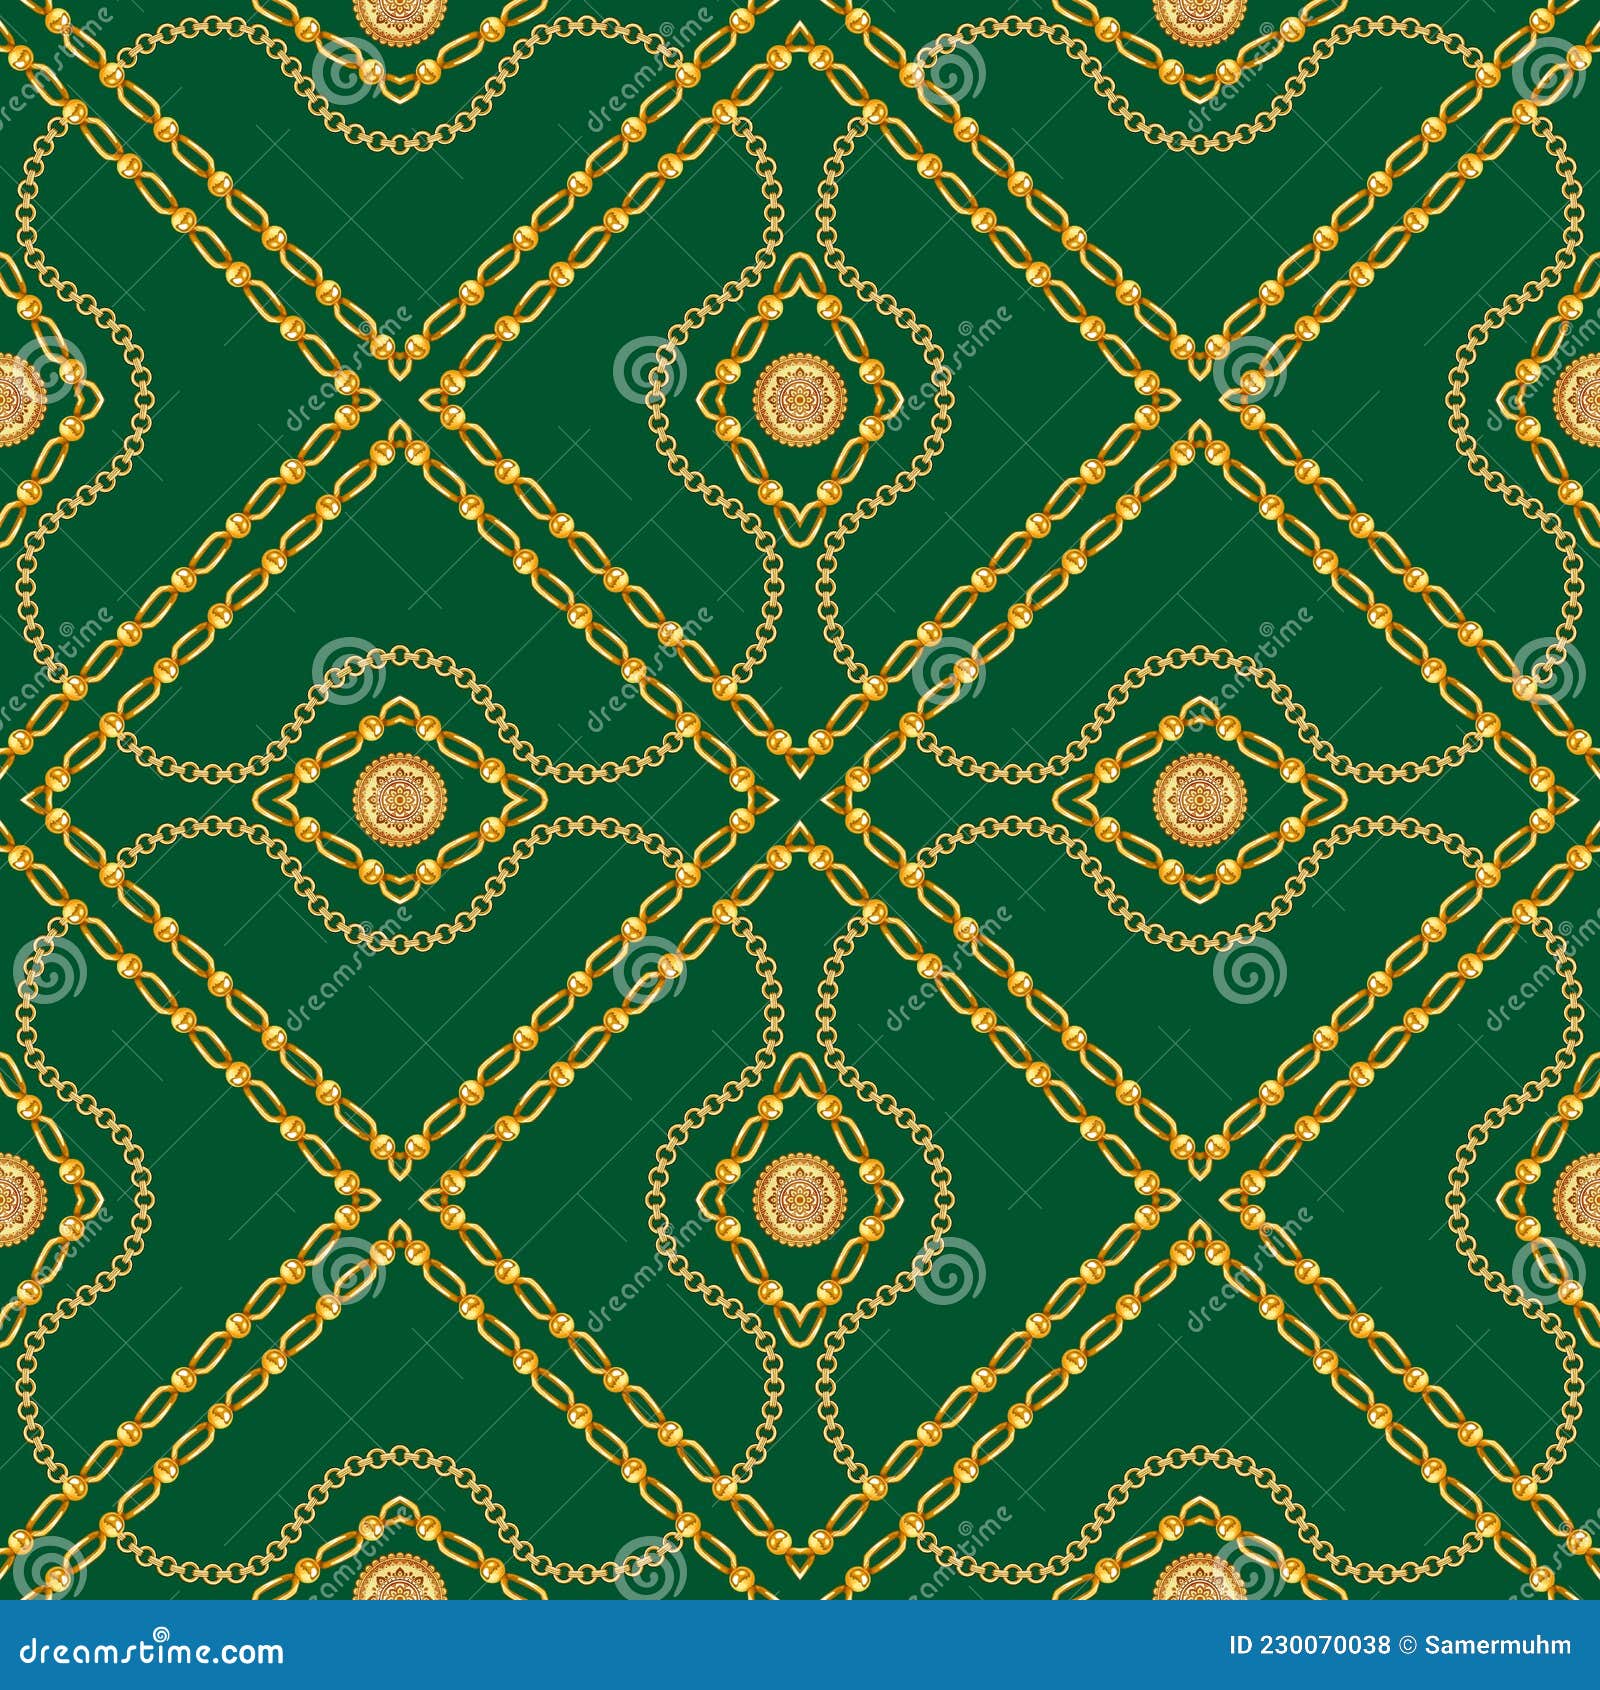 Seamless Golden Chains Pattern, on Dark Green Background. Ready for ...